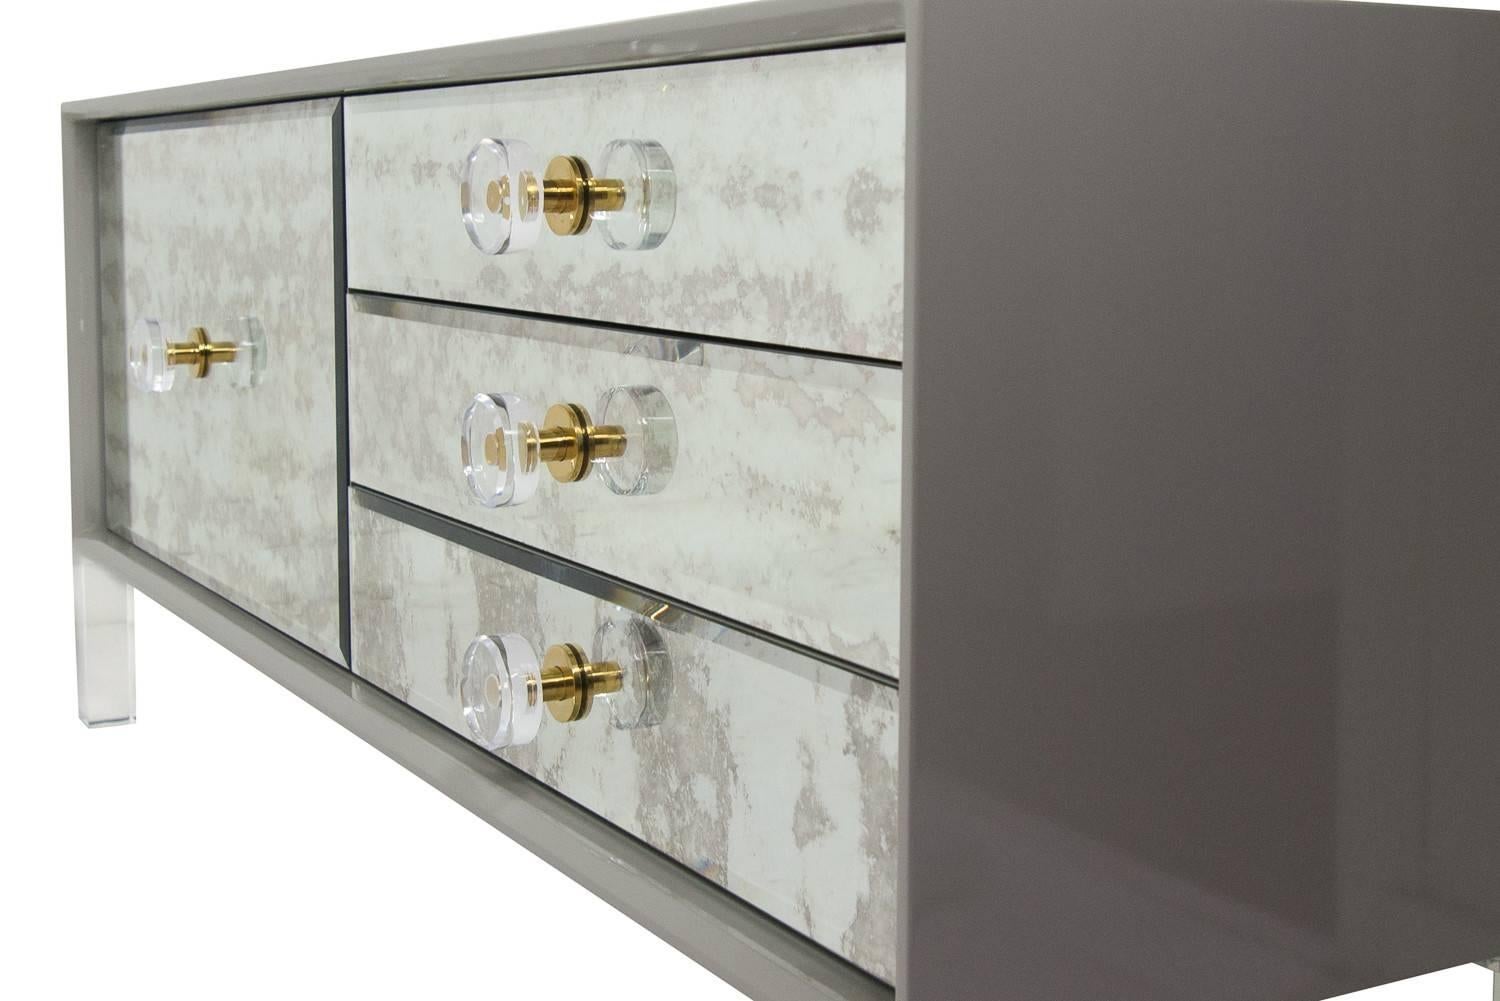 Juliette just went petite, the case is made in greystone lacquer finish, and has antiqued mirror door and drawer fronts. This antiqued look makes the piece a class of it's own. The use of the Lucite with brass round pulls creates the perfect mix of